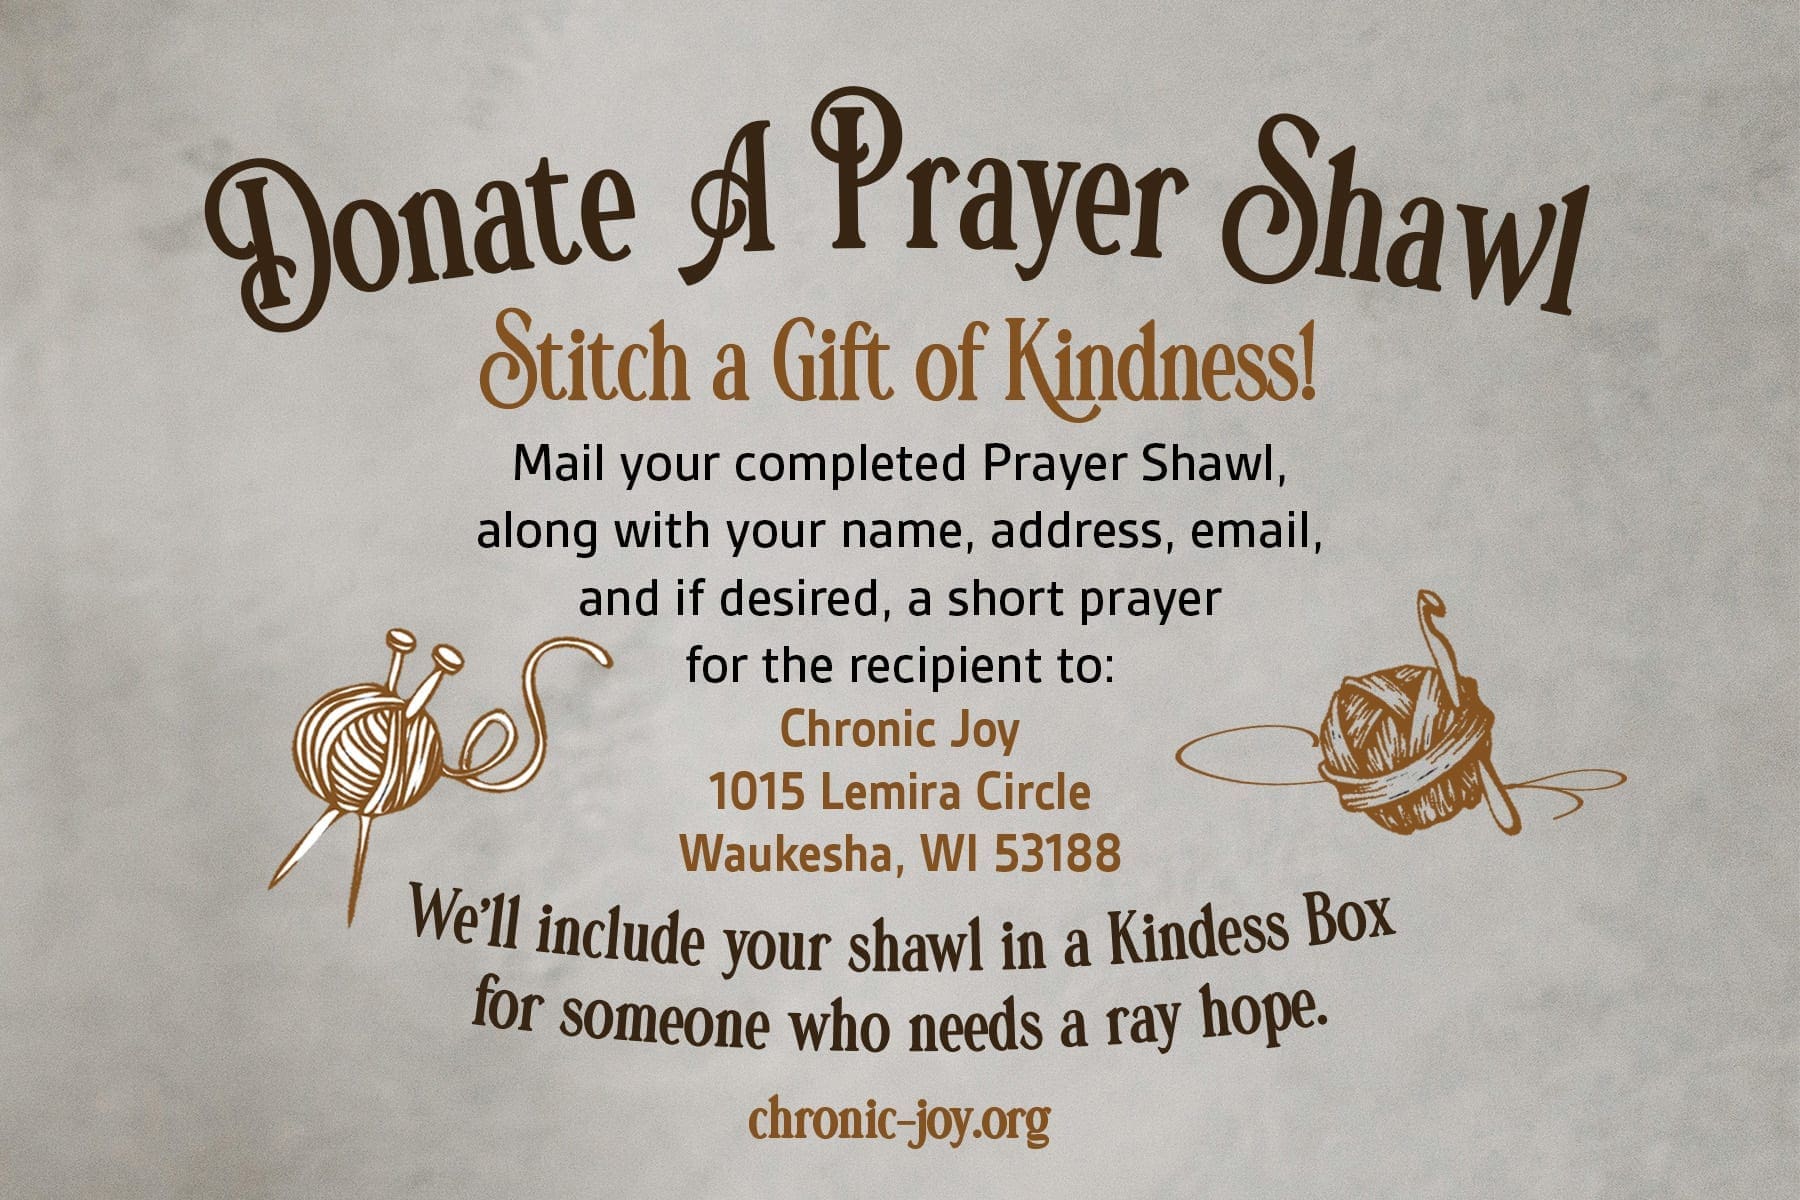 Donate A Prayer Shawl • Stitch a Gift of Kindness Mail your completed Prayer Shawl, along with your name, address, email, and if desired, a short prayer for the recipient to: Chronic Joy, 1015 Lemira Circle, Waukesha, WI 53188. We'll include your shawl in a Kindness Box for someone who needs a ray of hope.